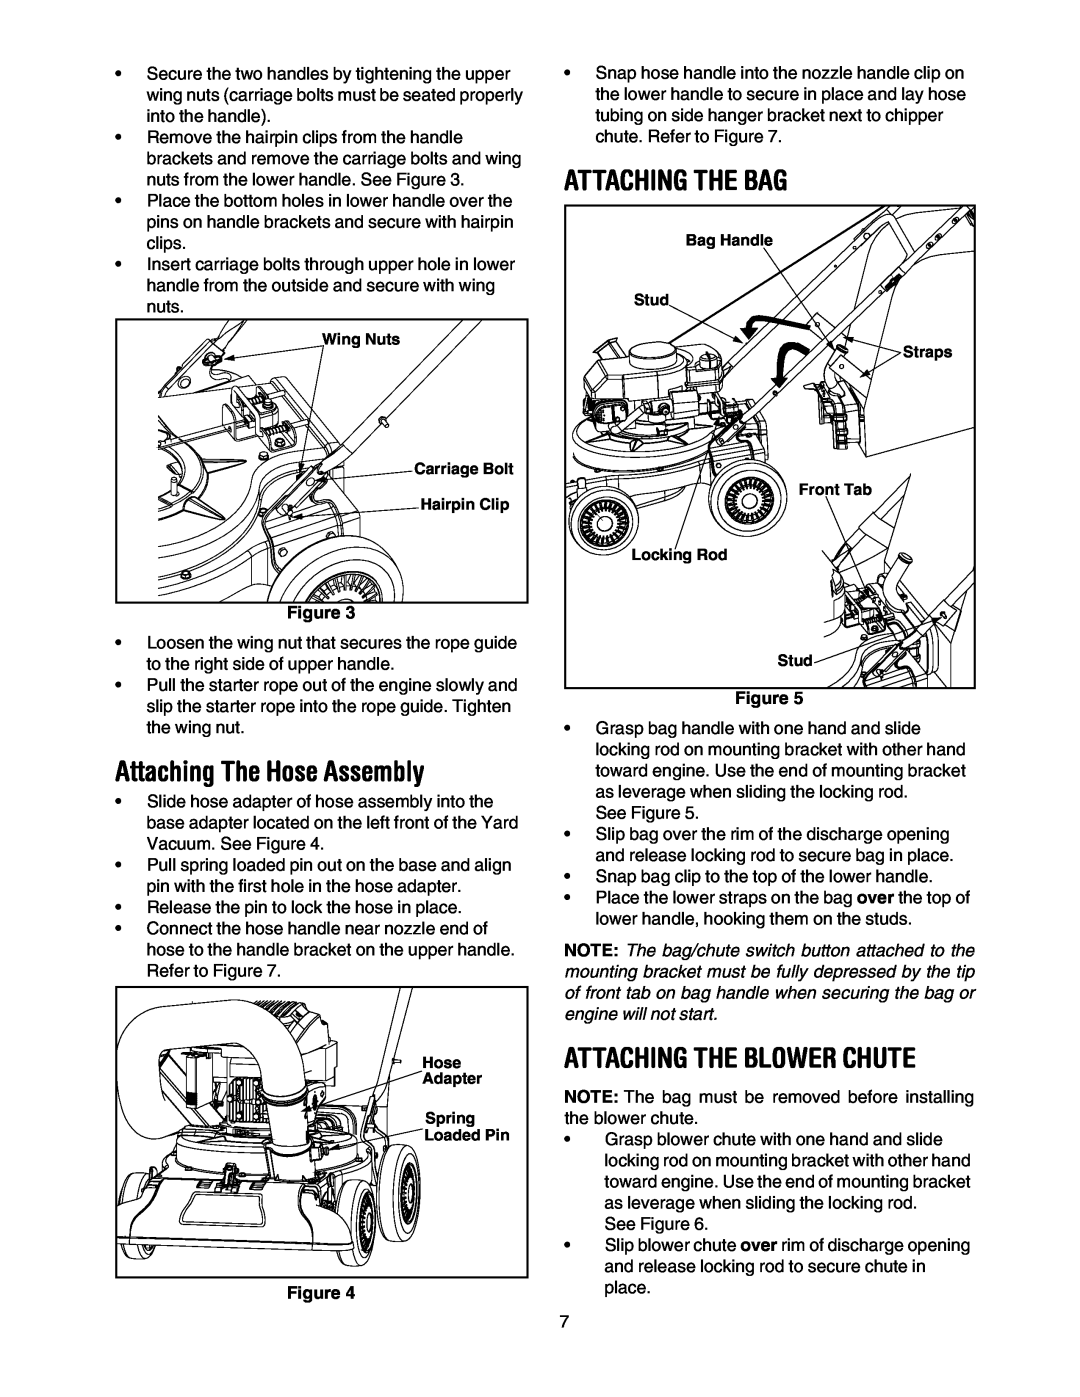 Sears 247.77055 operating instructions Attaching The Hose Assembly, Attaching The Bag, Attaching The Blower Chute 